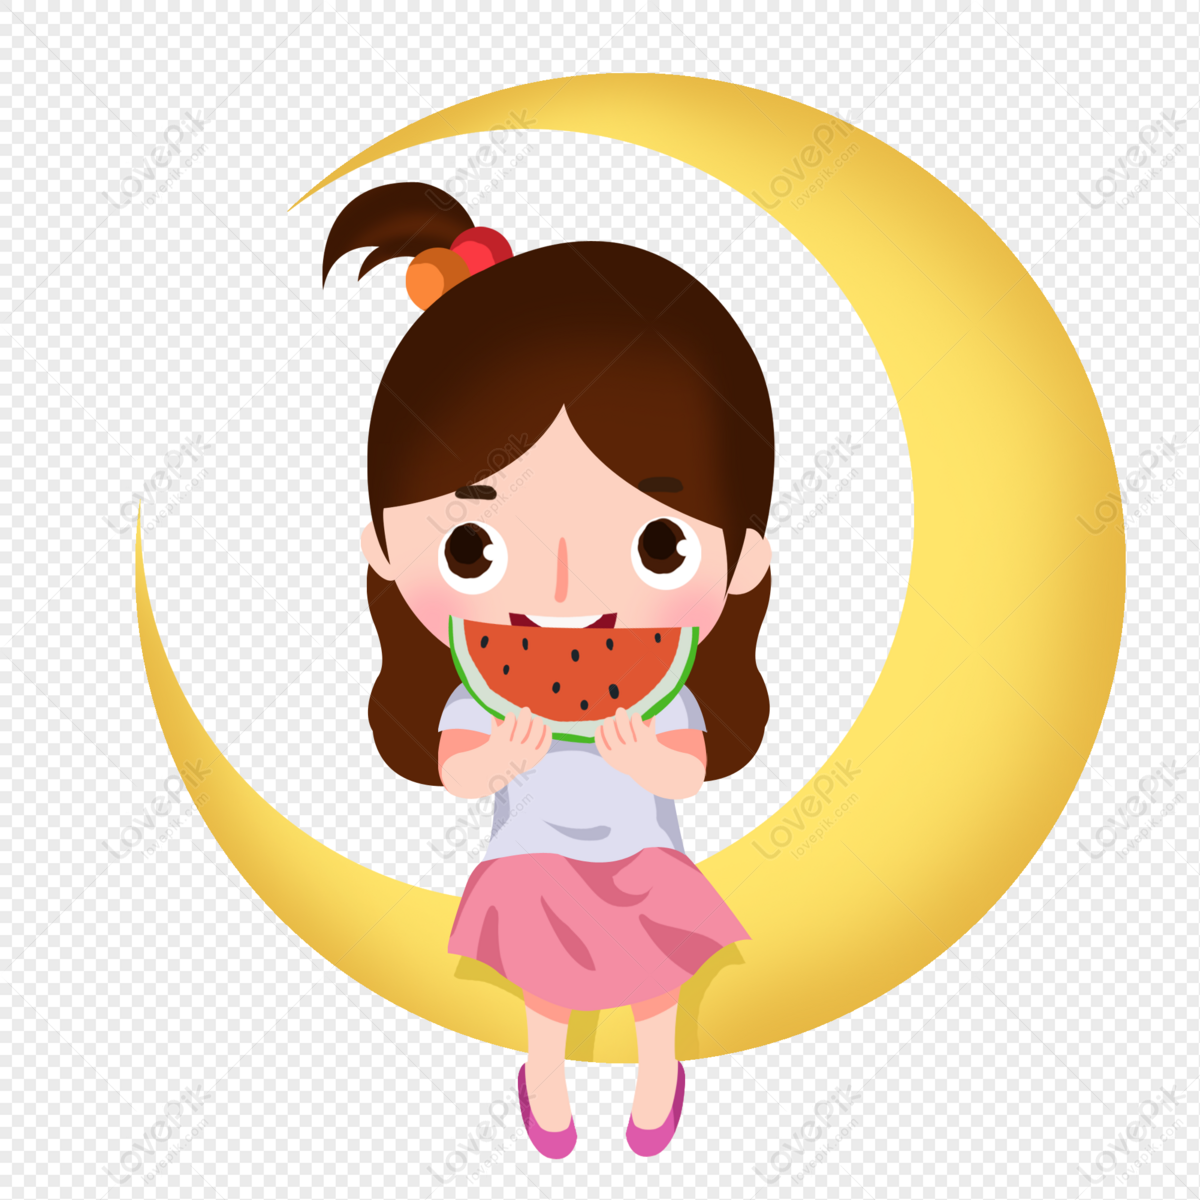 Cartoon Girl Sitting On The Moon Eating Watermelon PNG Transparent And  Clipart Image For Free Download - Lovepik | 401421656